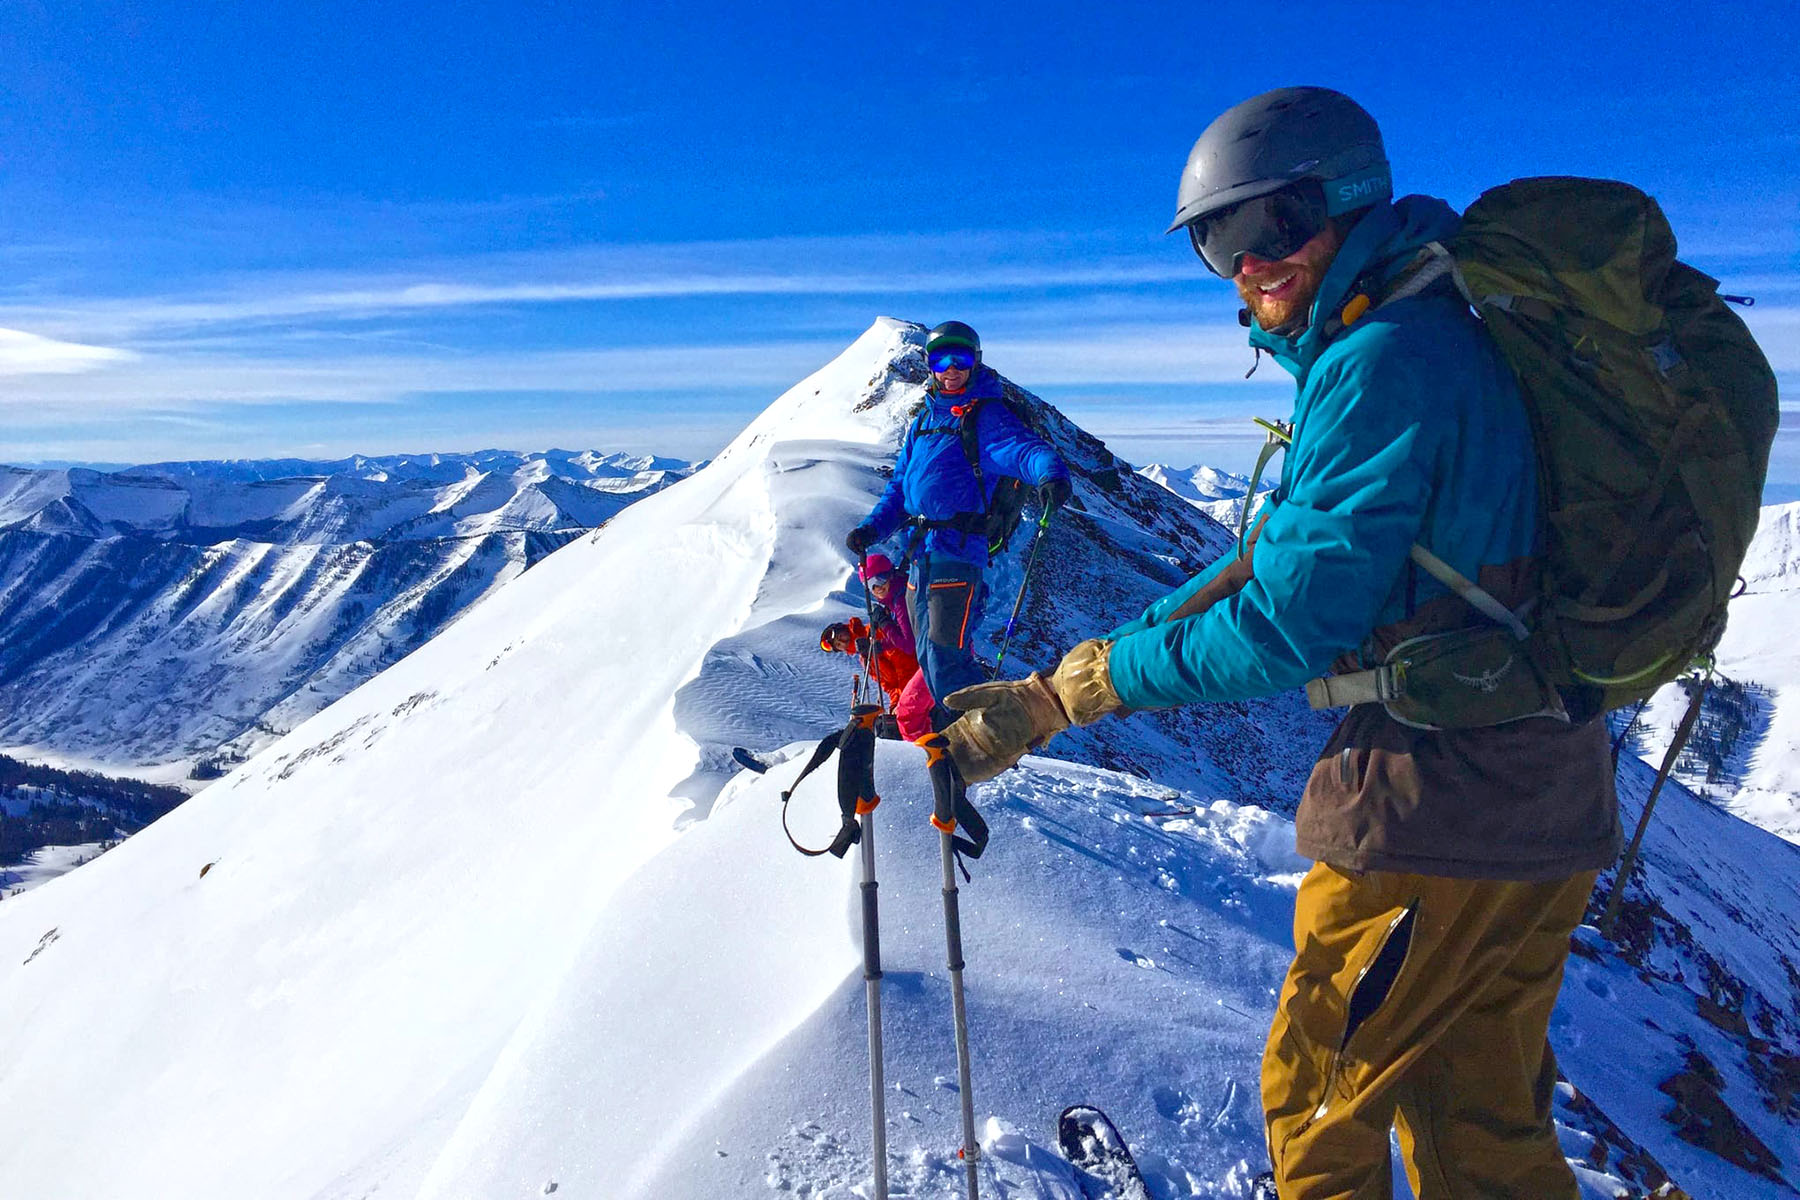 Colorado Backcountry - Guided Crested Butte Backcountry Skiing and Mountain Biking